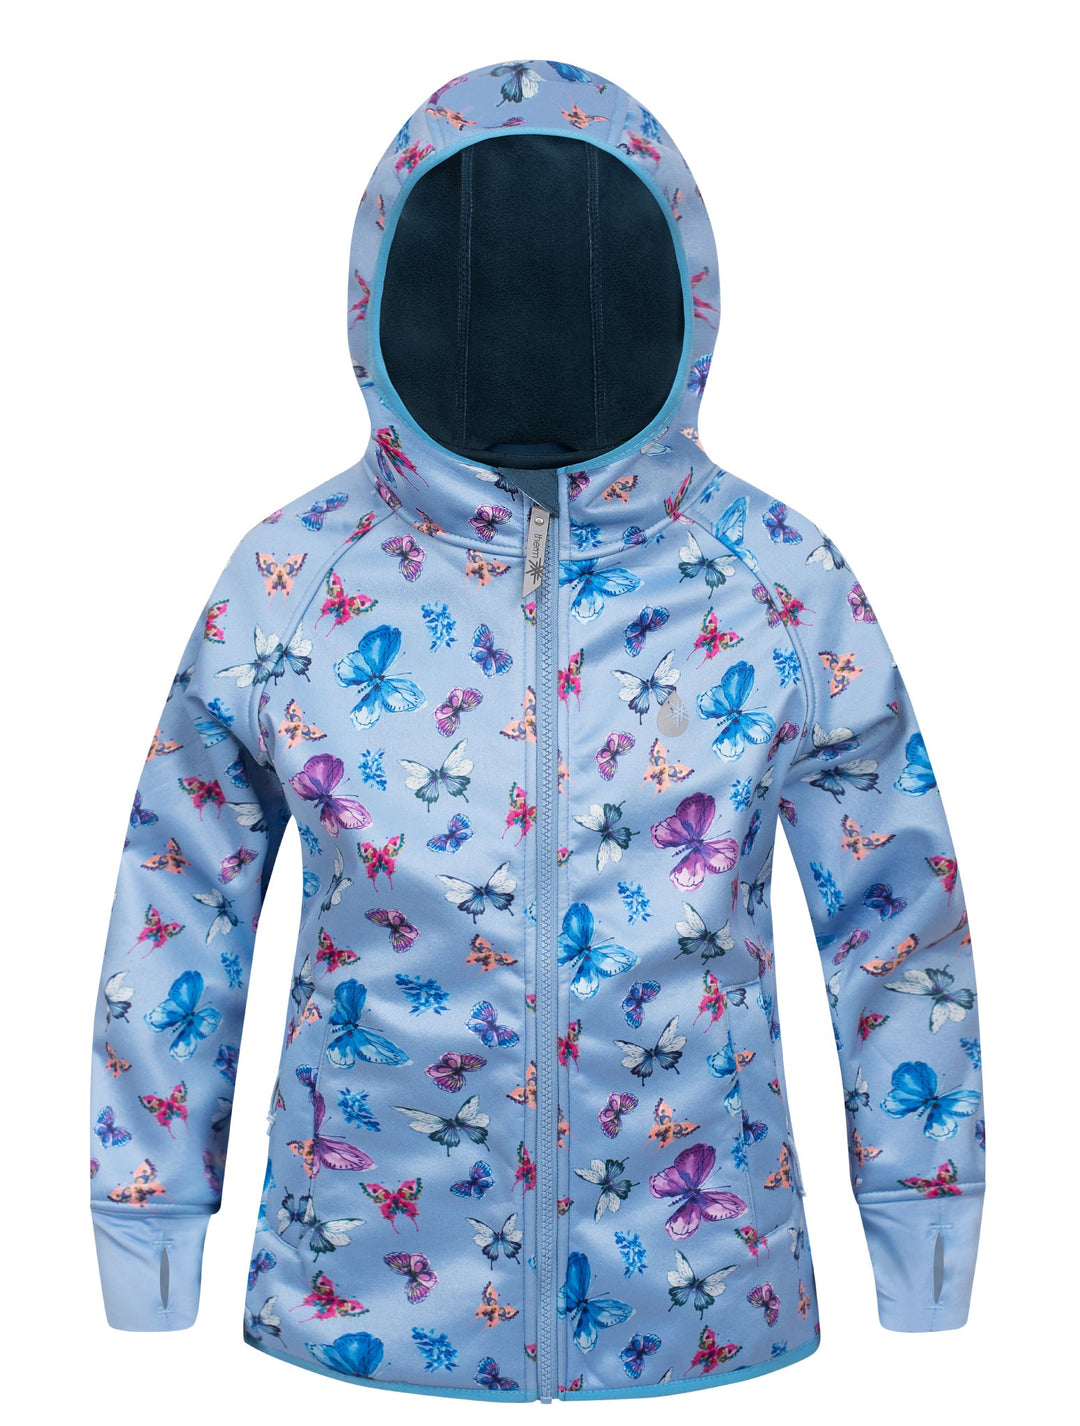 All-Weather Hoodie - Butterfly Sky